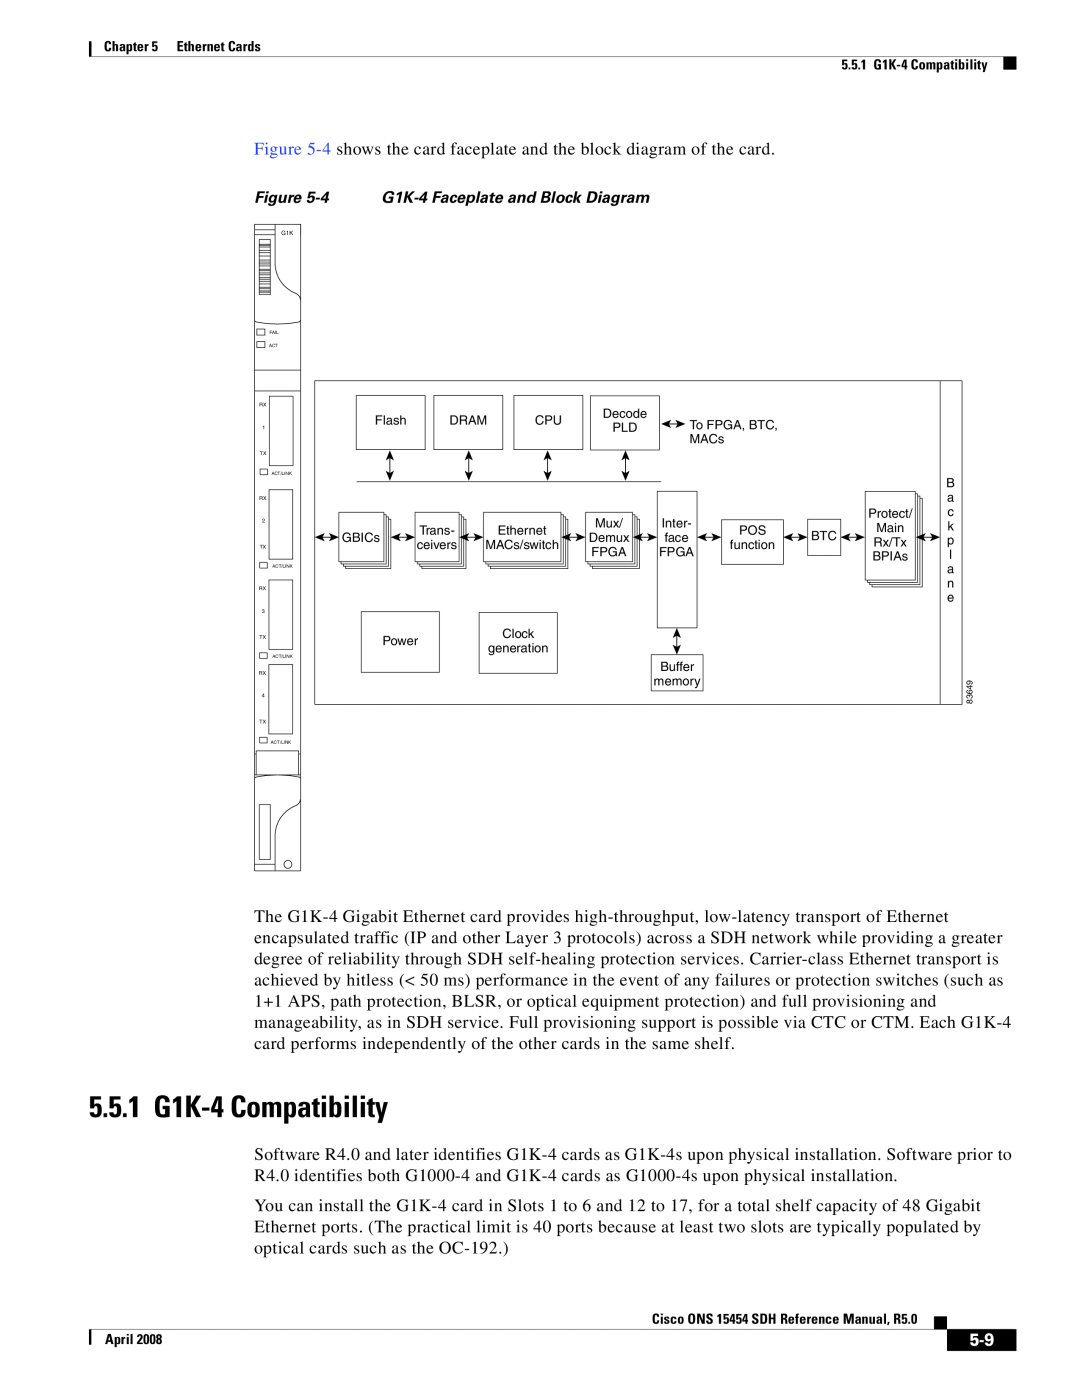 Cisco Systems ONS 15454 SDH specifications 5.5.1 G1K-4Compatibility, 4 G1K-4Faceplate and Block Diagram 